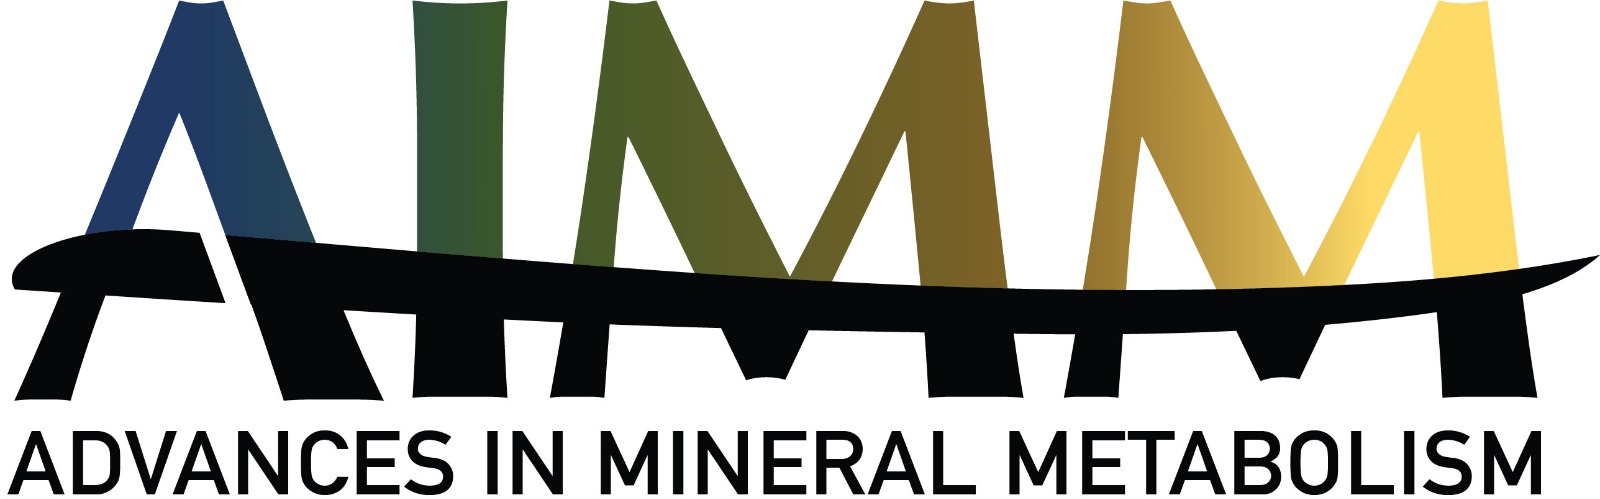 Advances in Mineral Metabolism